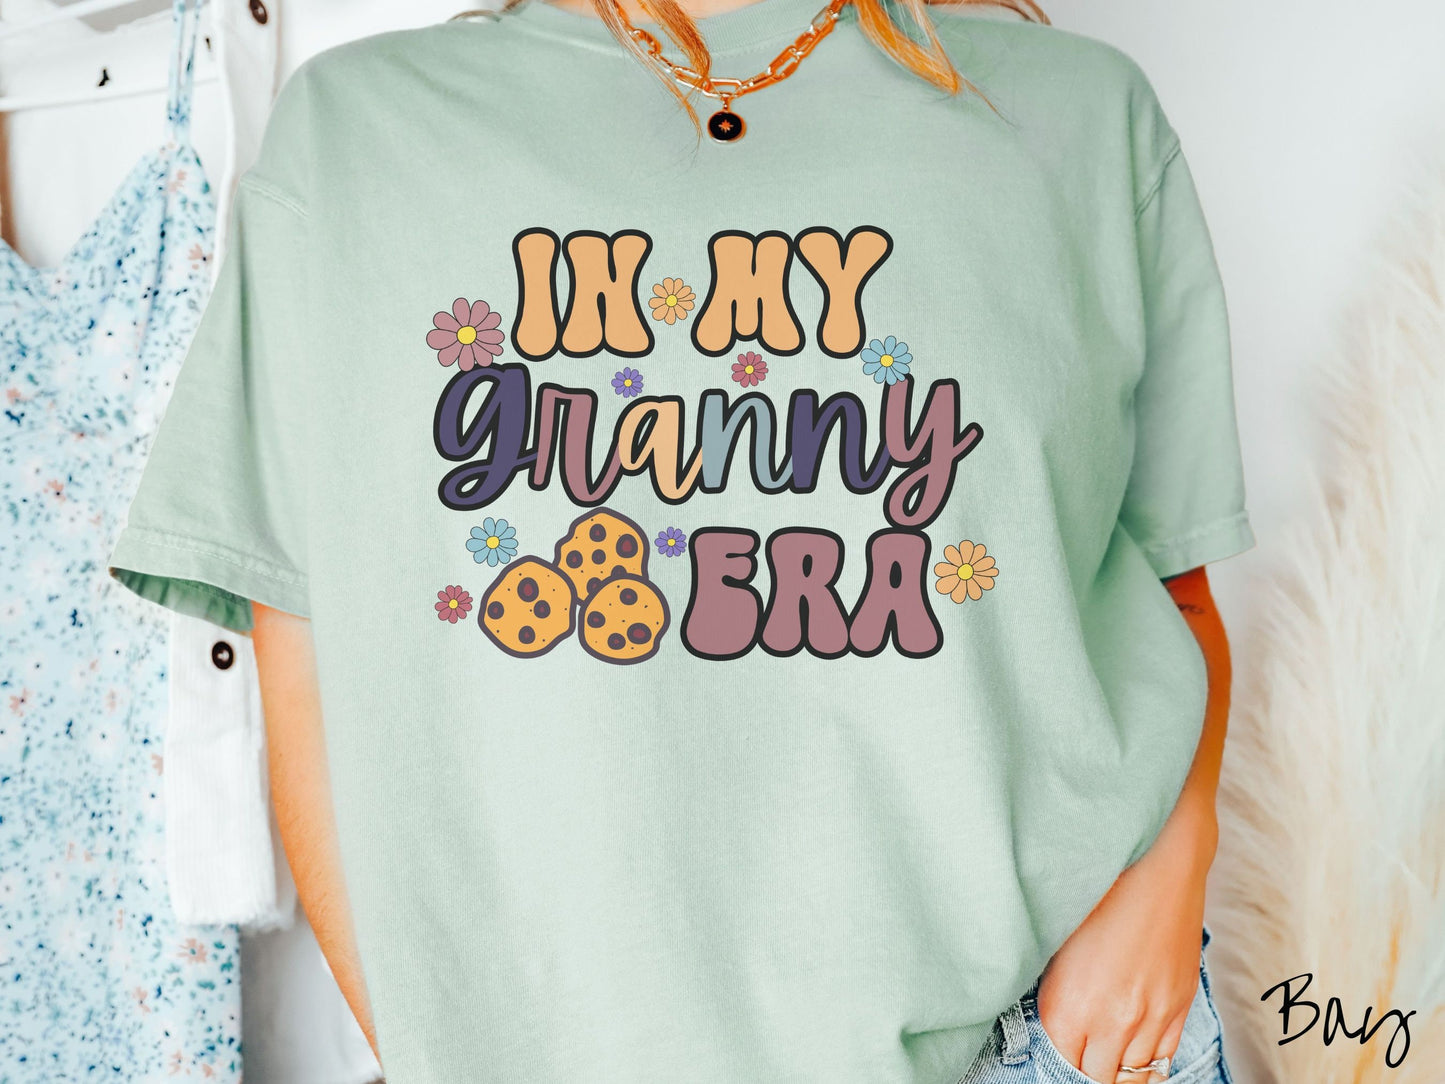 A woman wearing a cute bay colored sweatshirt with text on the front saying In My Granny Era, with flowers and chocolate chip cookies mixed within the text.